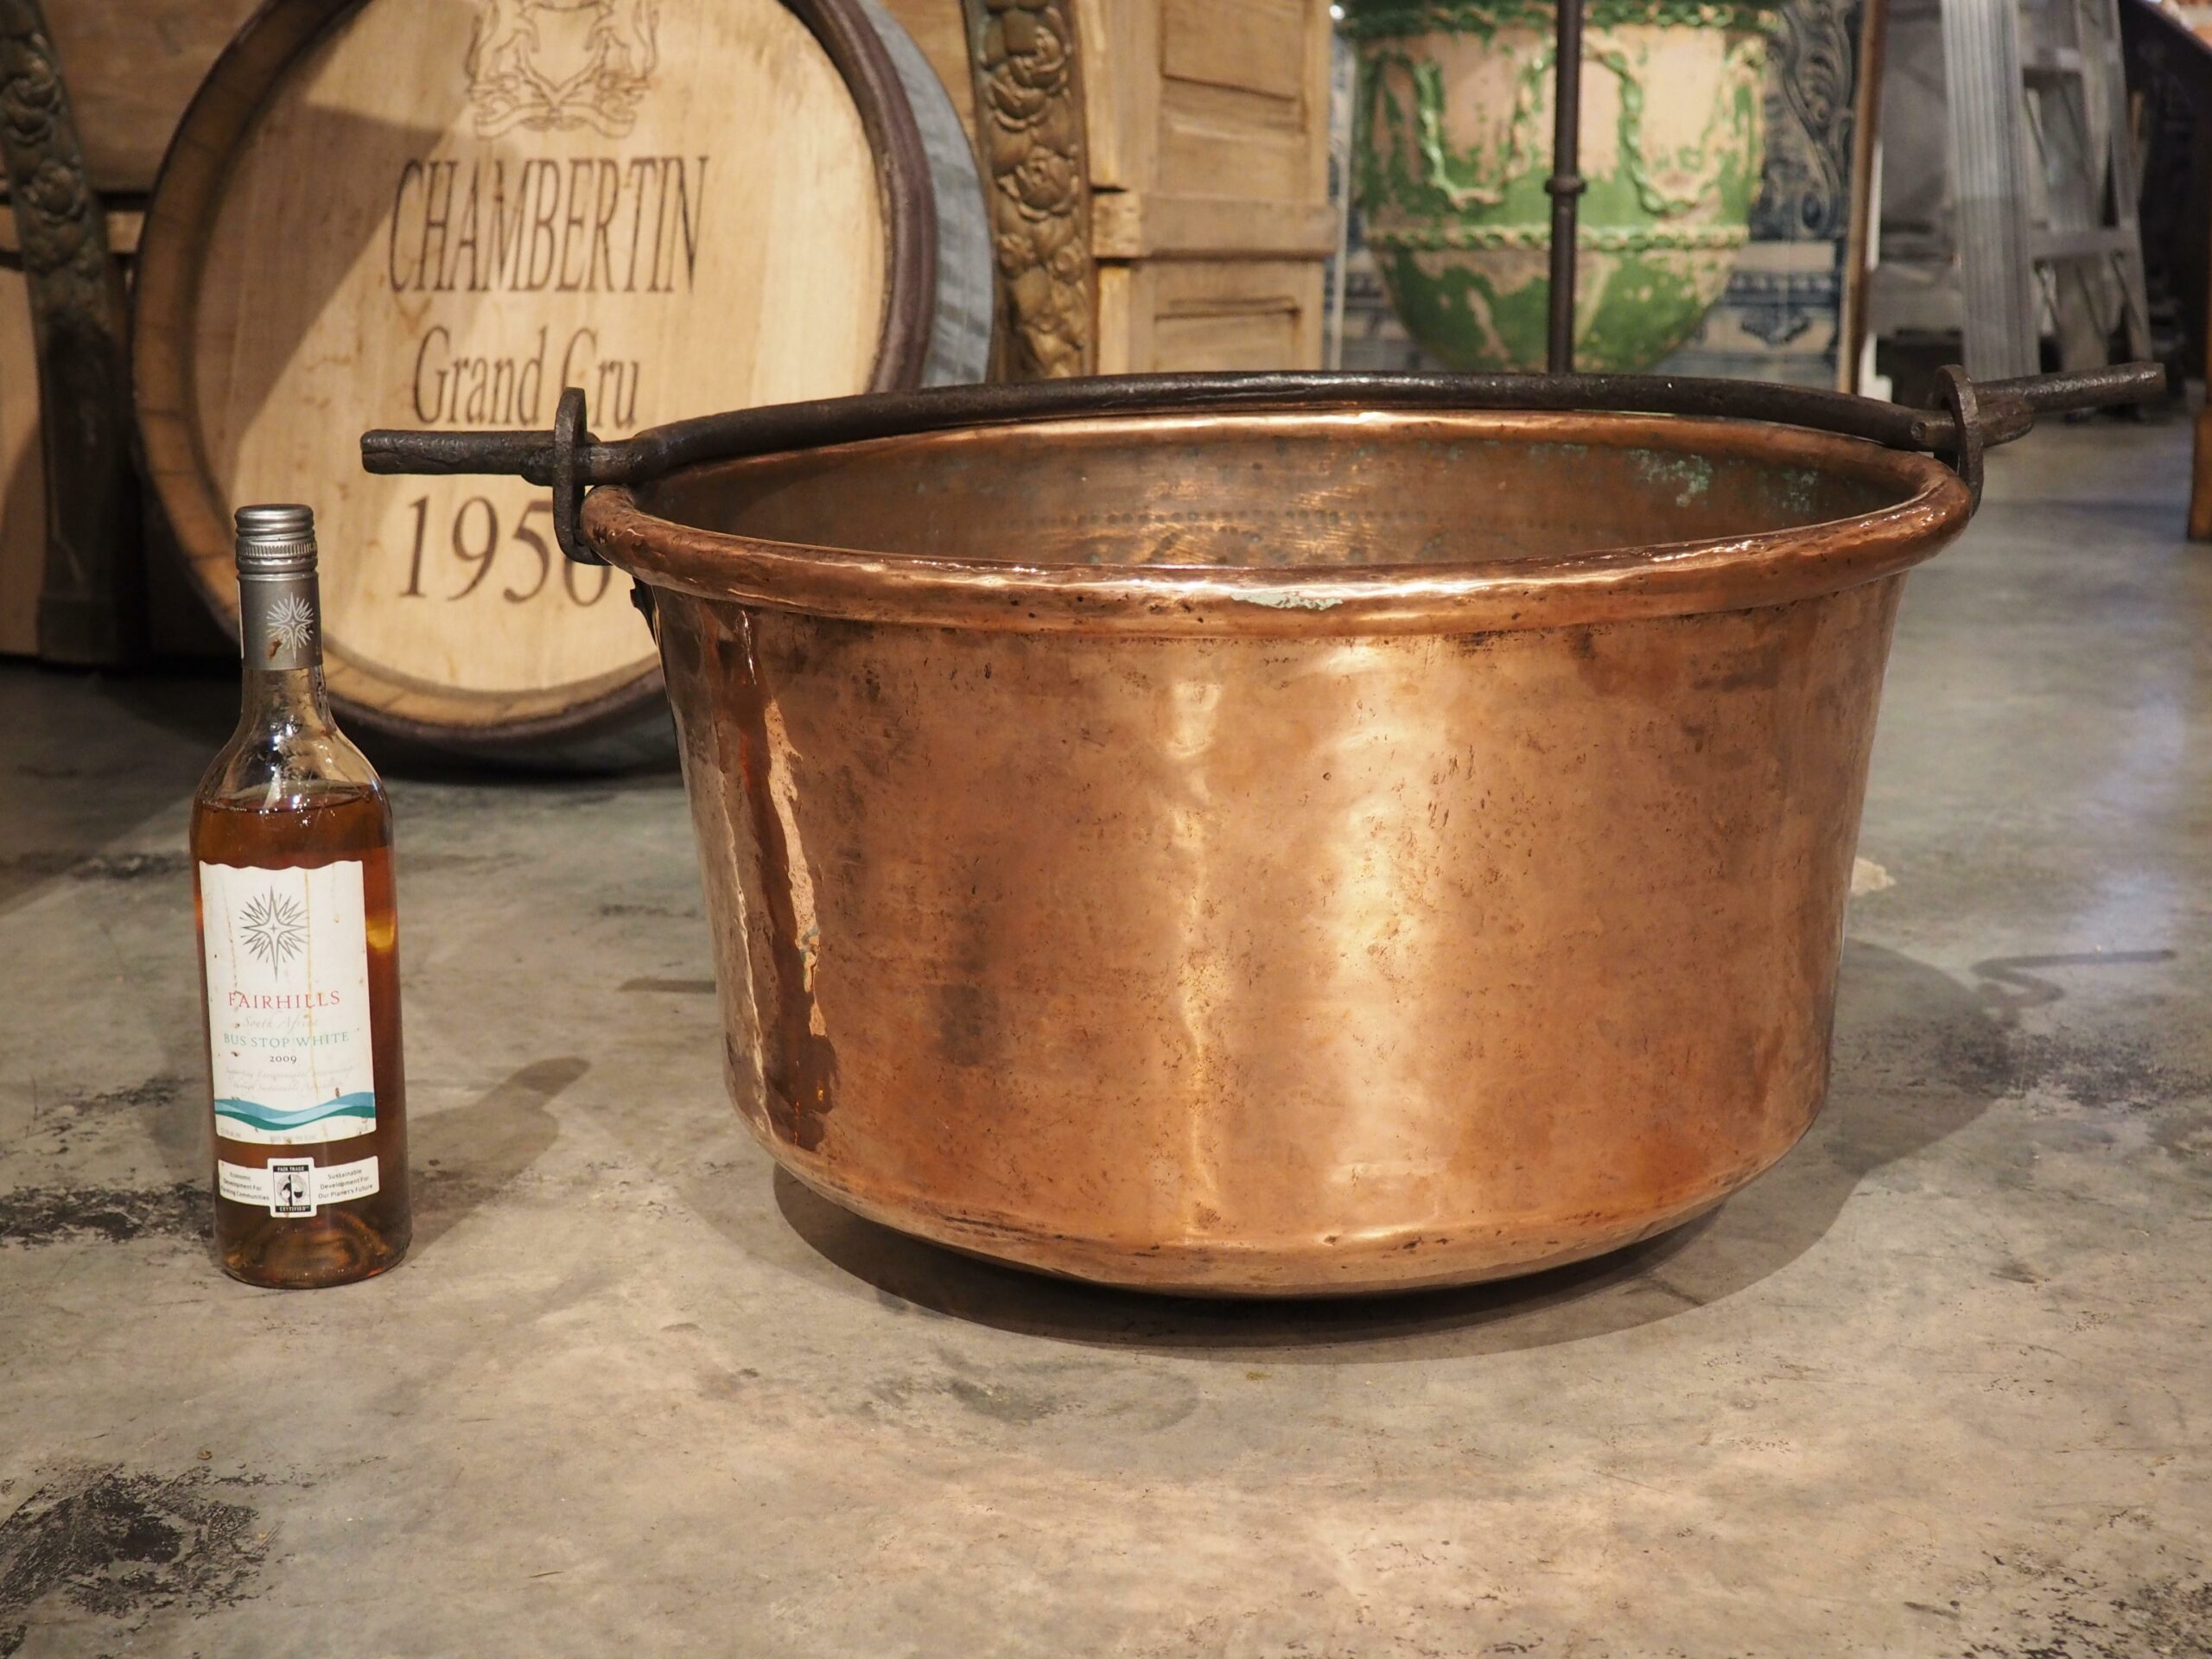 Massive Spanish Copper Cauldron with Iron Hook Handles For Sale at